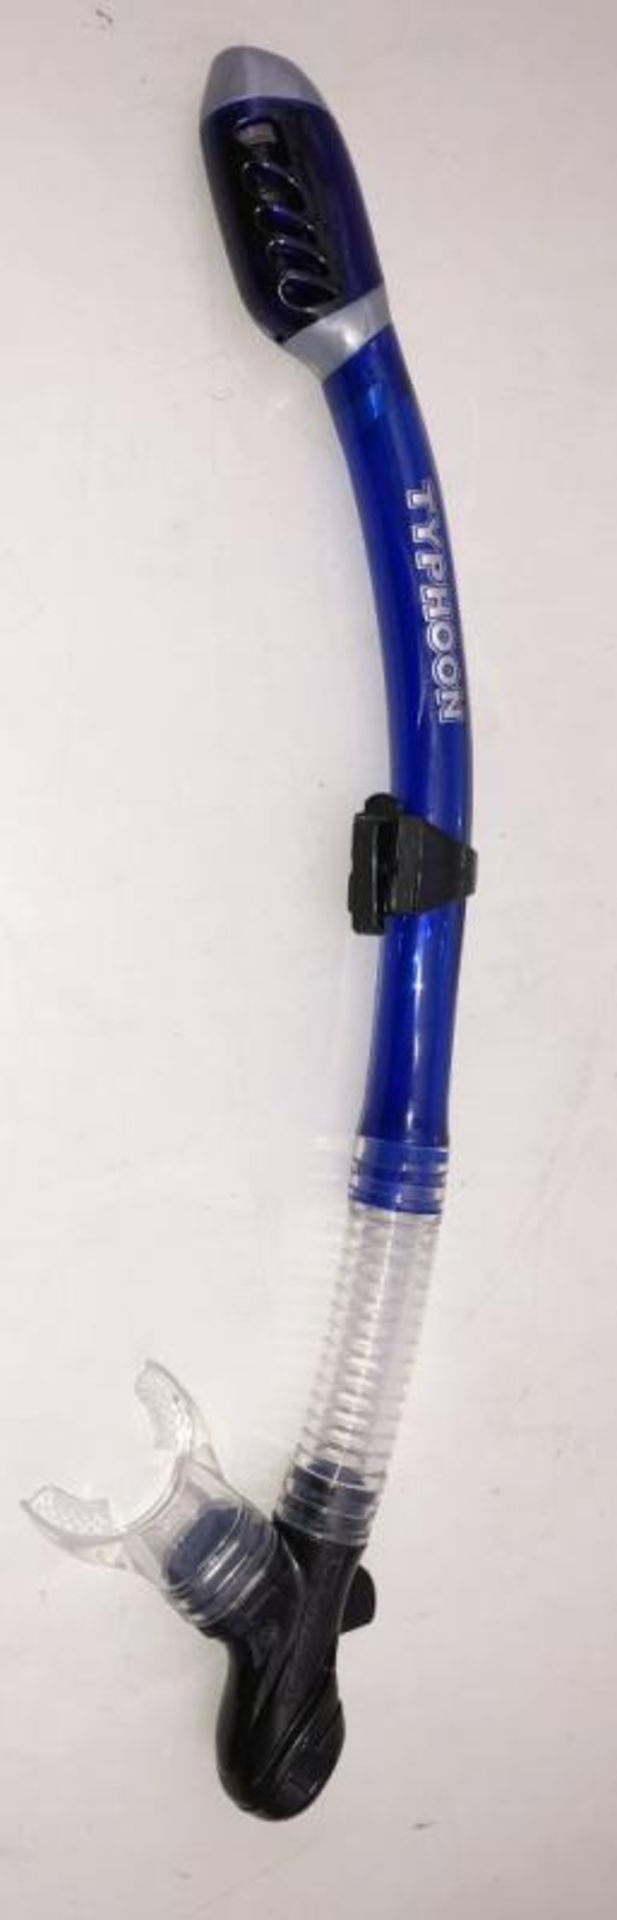 34 x Branded Diving Snorkel's - CL349 - Altrincham WA14 - Brand New! - Image 29 of 30